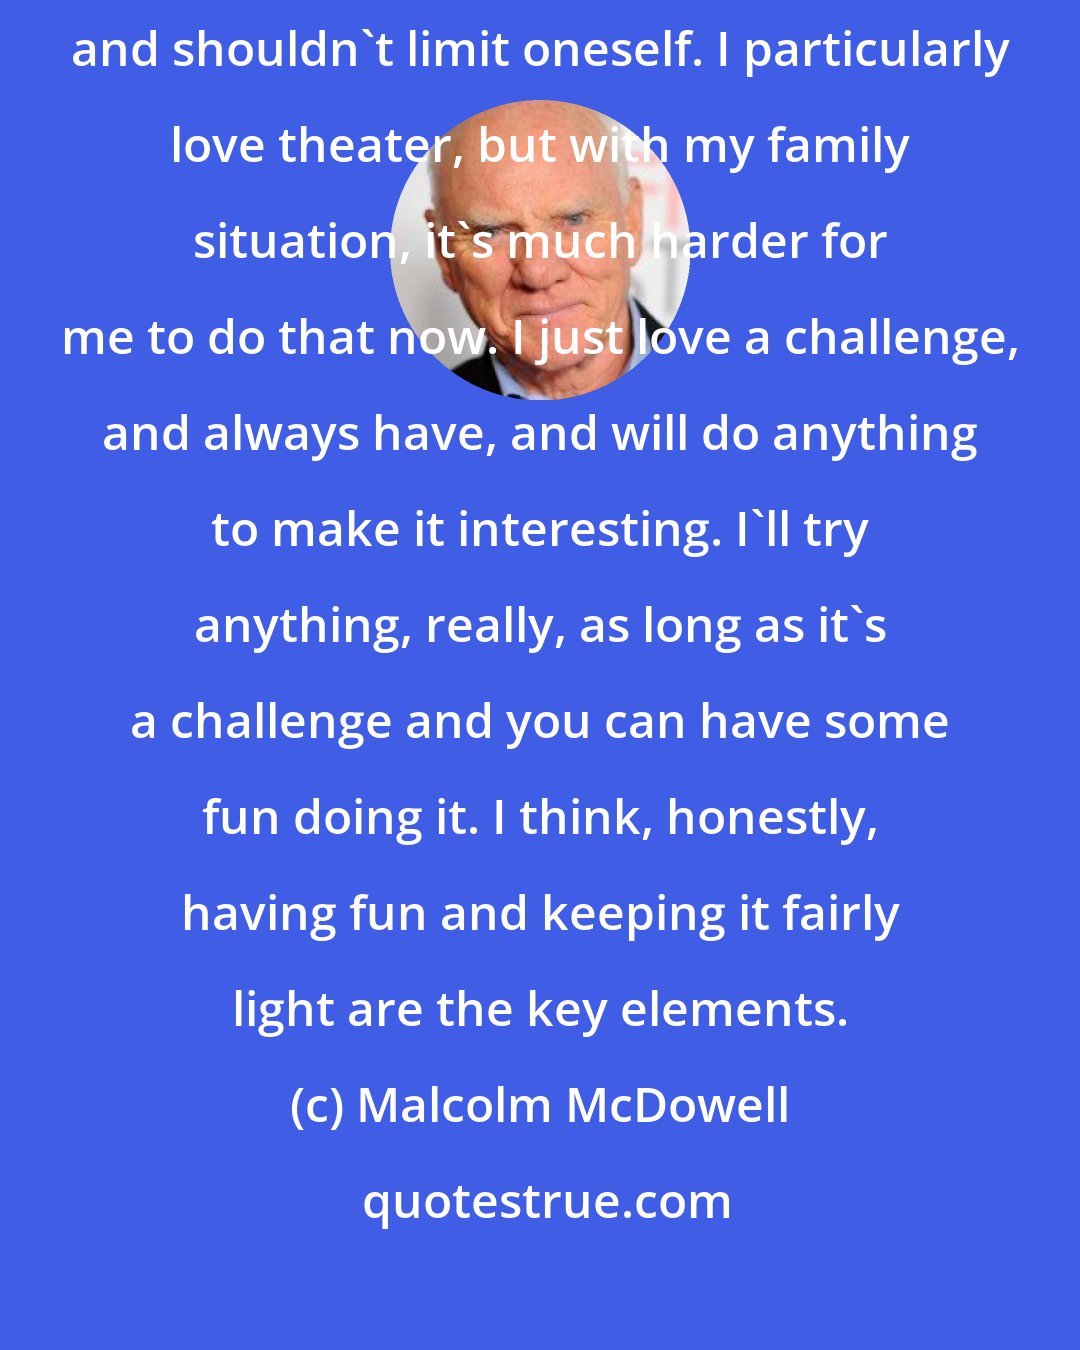 Malcolm McDowell: I'd love to do radio plays. I think that one should be open to everything and shouldn't limit oneself. I particularly love theater, but with my family situation, it's much harder for me to do that now. I just love a challenge, and always have, and will do anything to make it interesting. I'll try anything, really, as long as it's a challenge and you can have some fun doing it. I think, honestly, having fun and keeping it fairly light are the key elements.